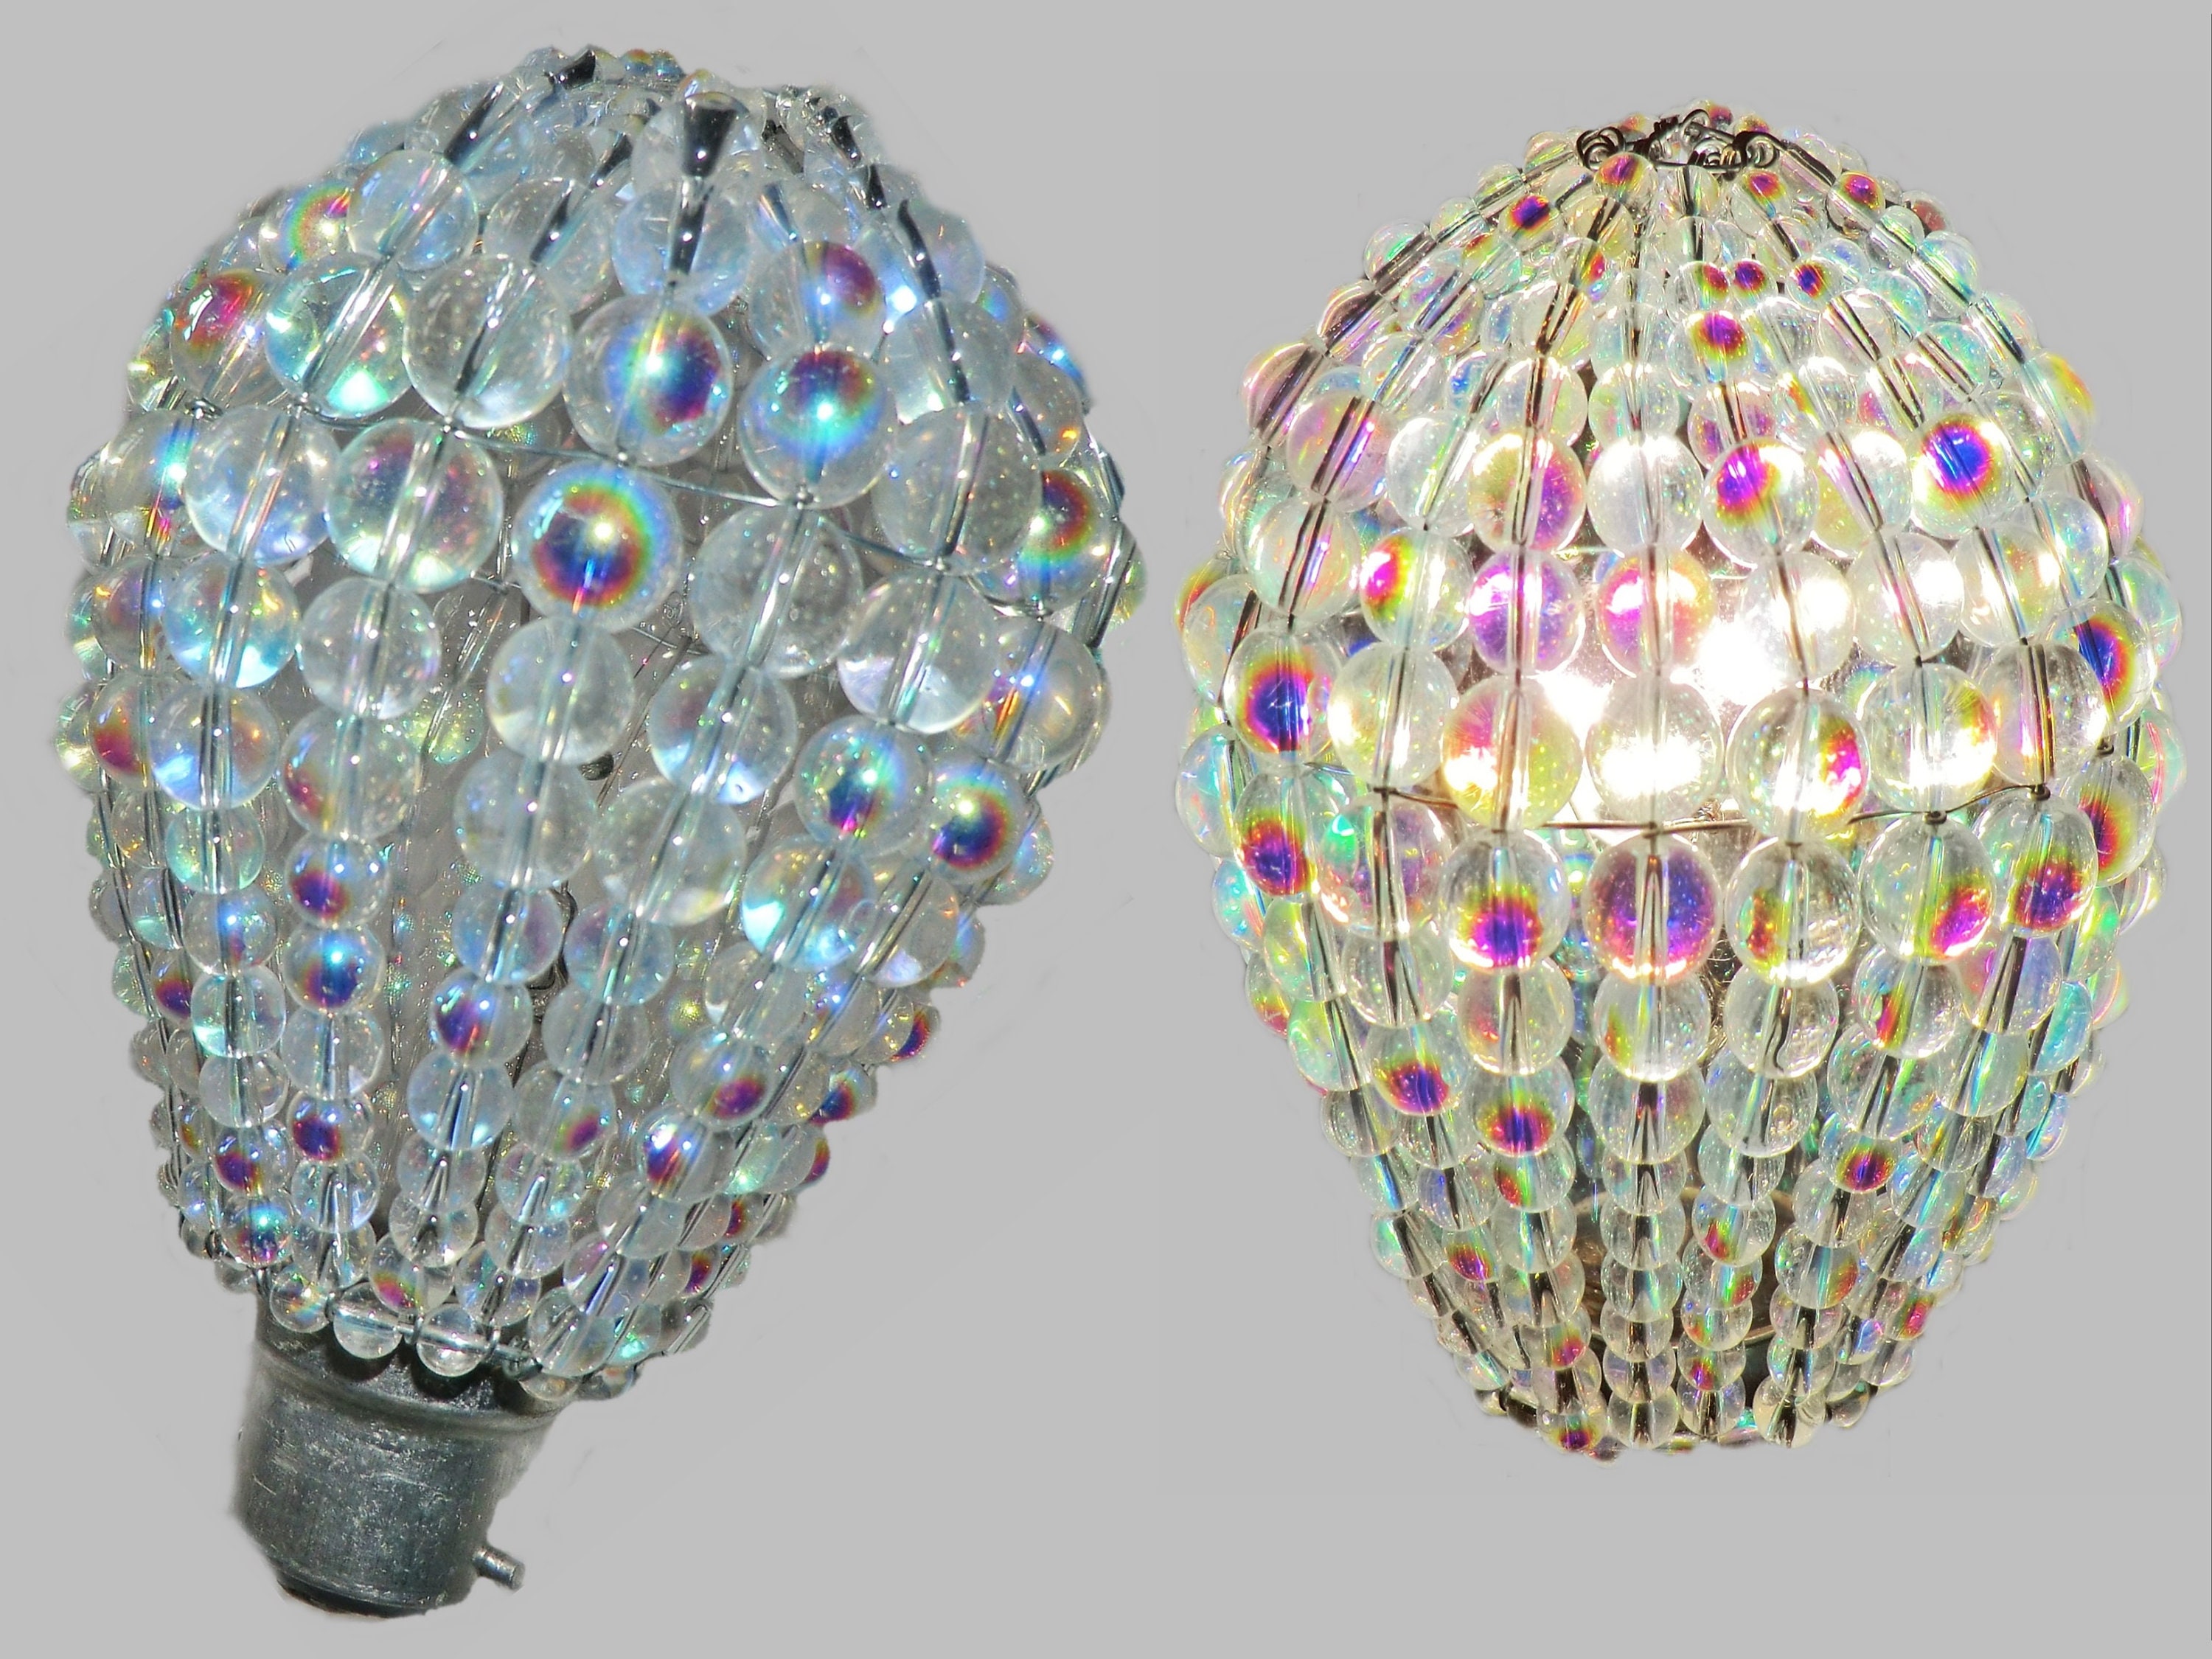 CHANDELIER GLASS CRYSTALS BEADS GLS NEWTON LIGHT BULB COVER LAMP SHADE RETRO 